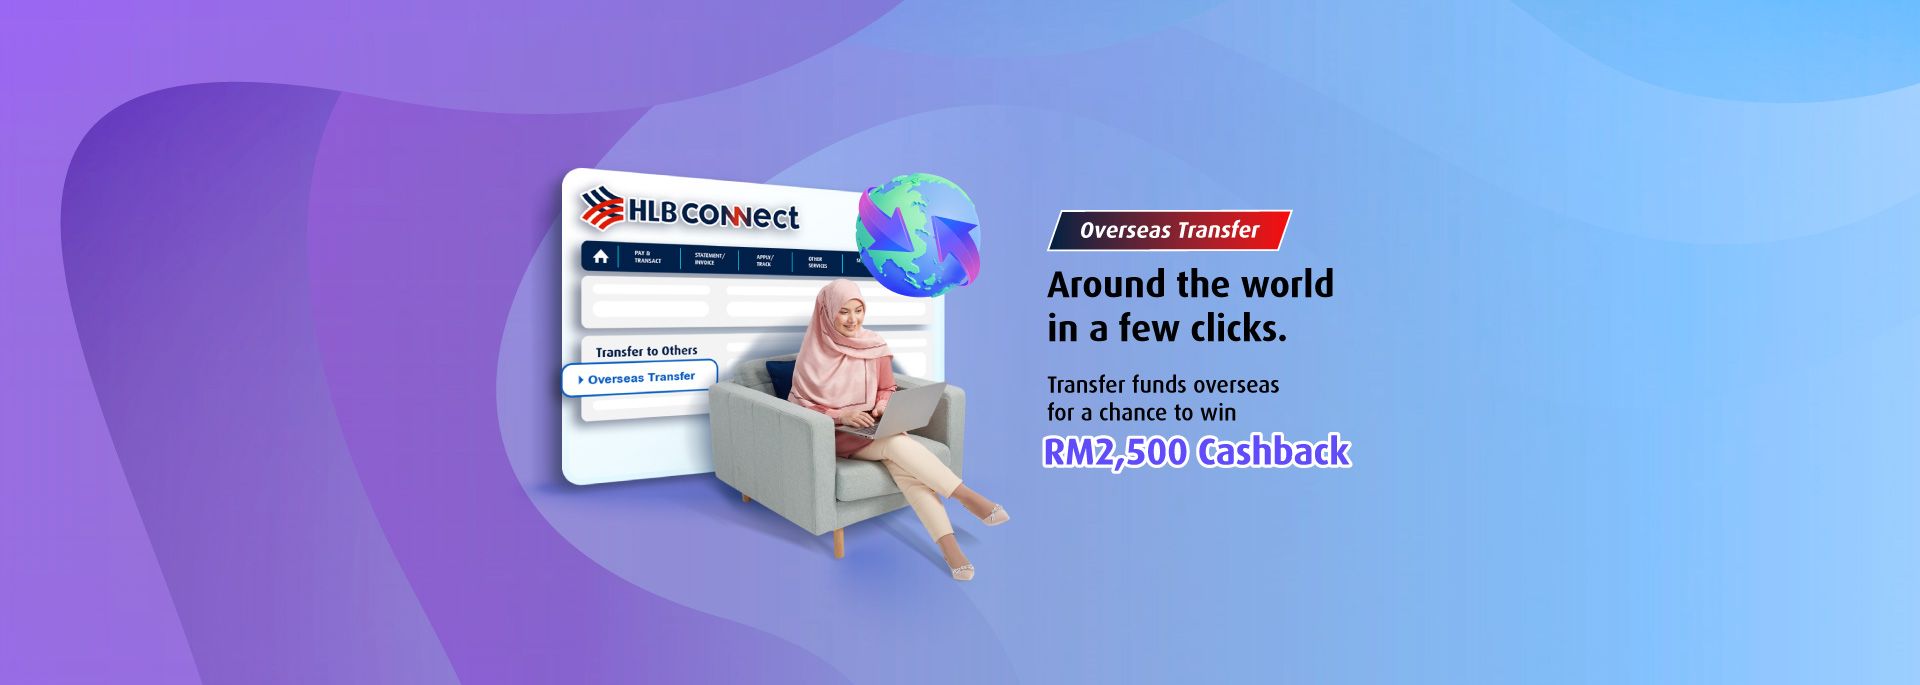 HLB Connect Overseas Transfer Promotion